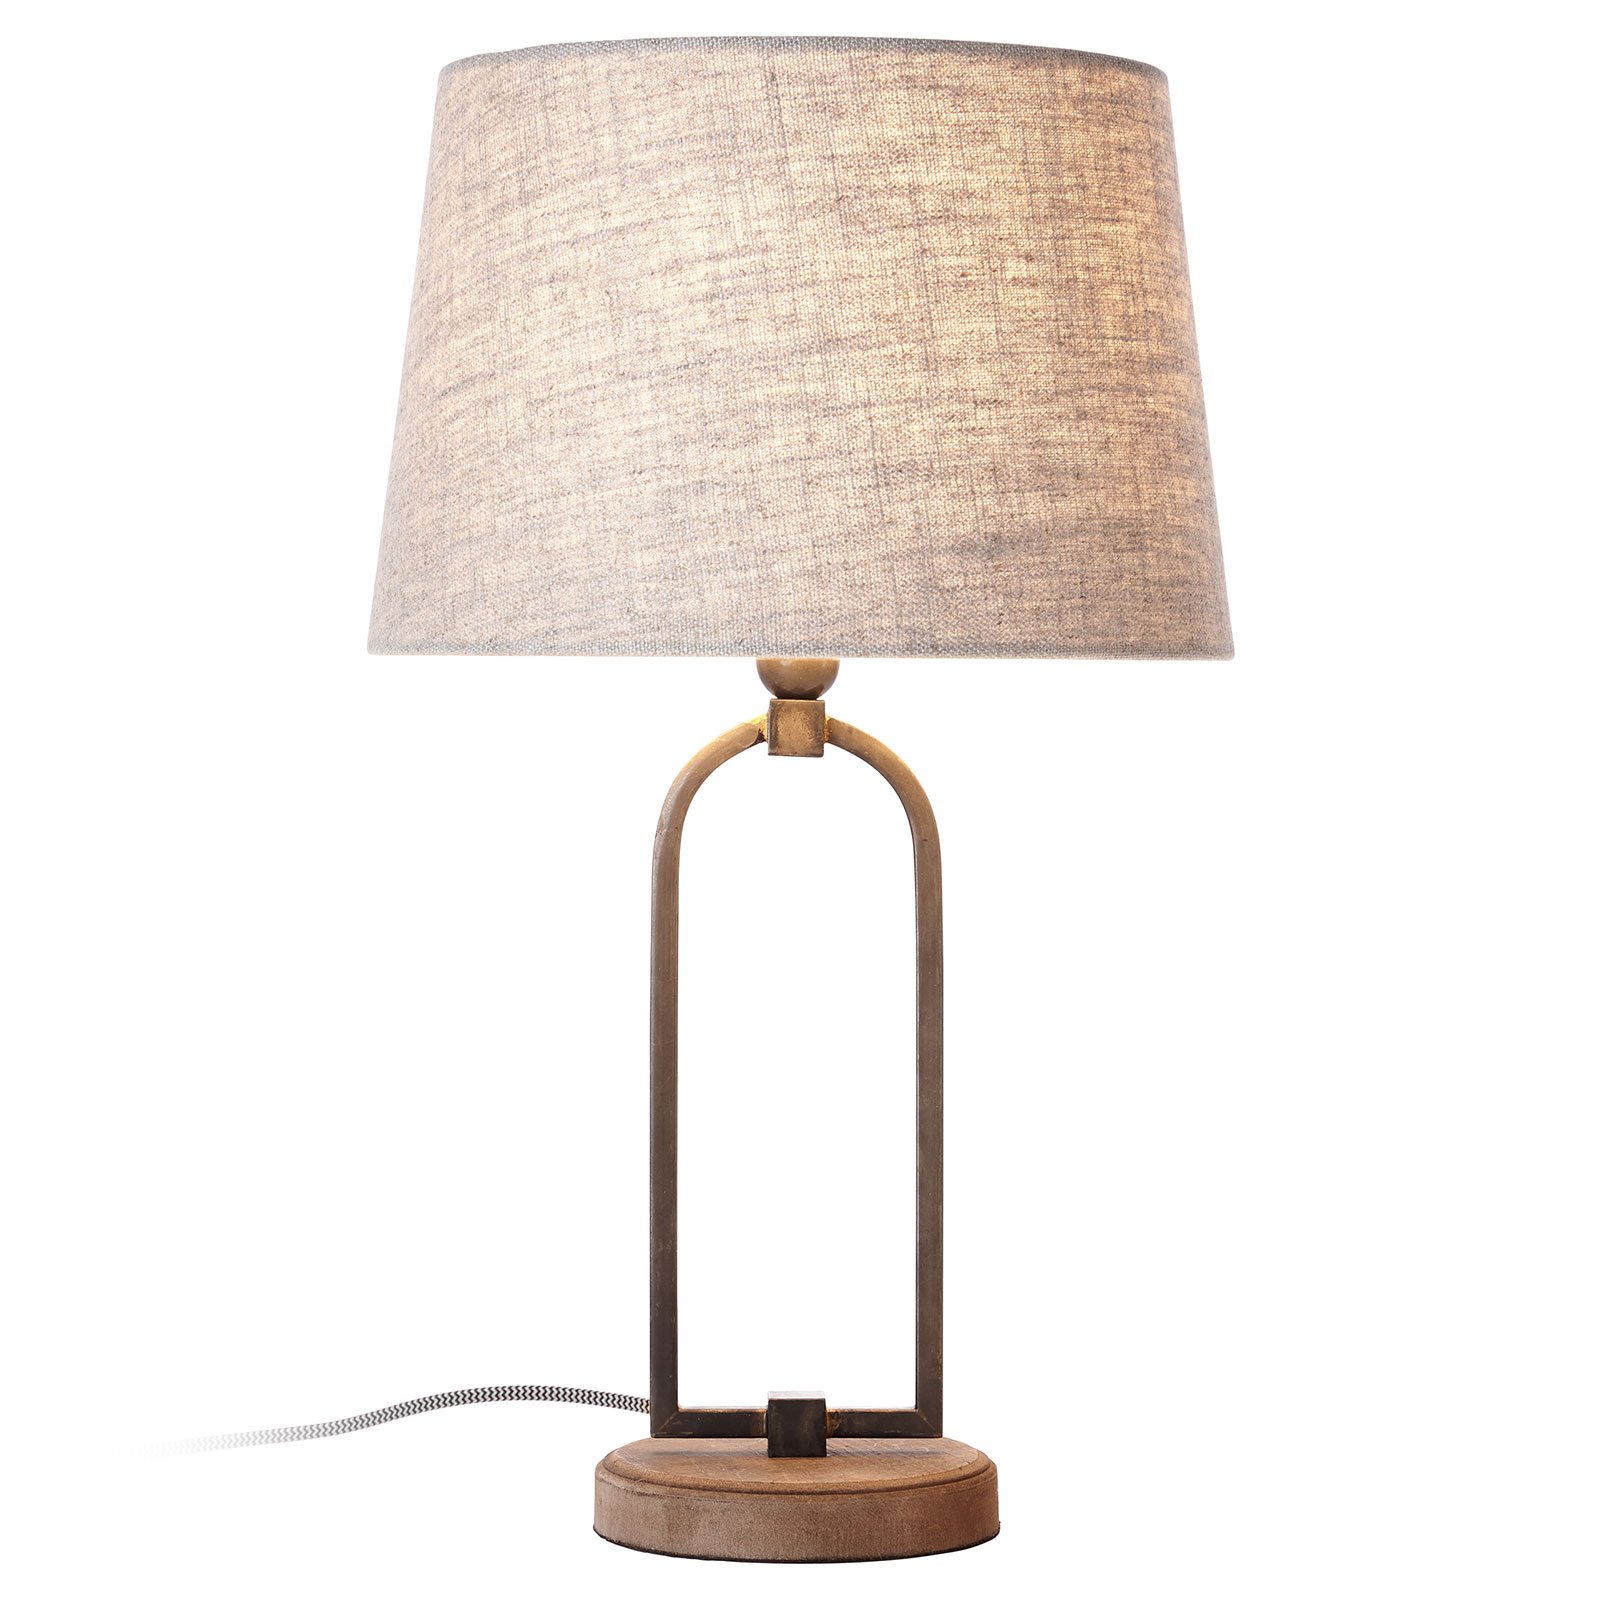 Sora table lamp with a stylish fabric lampshade